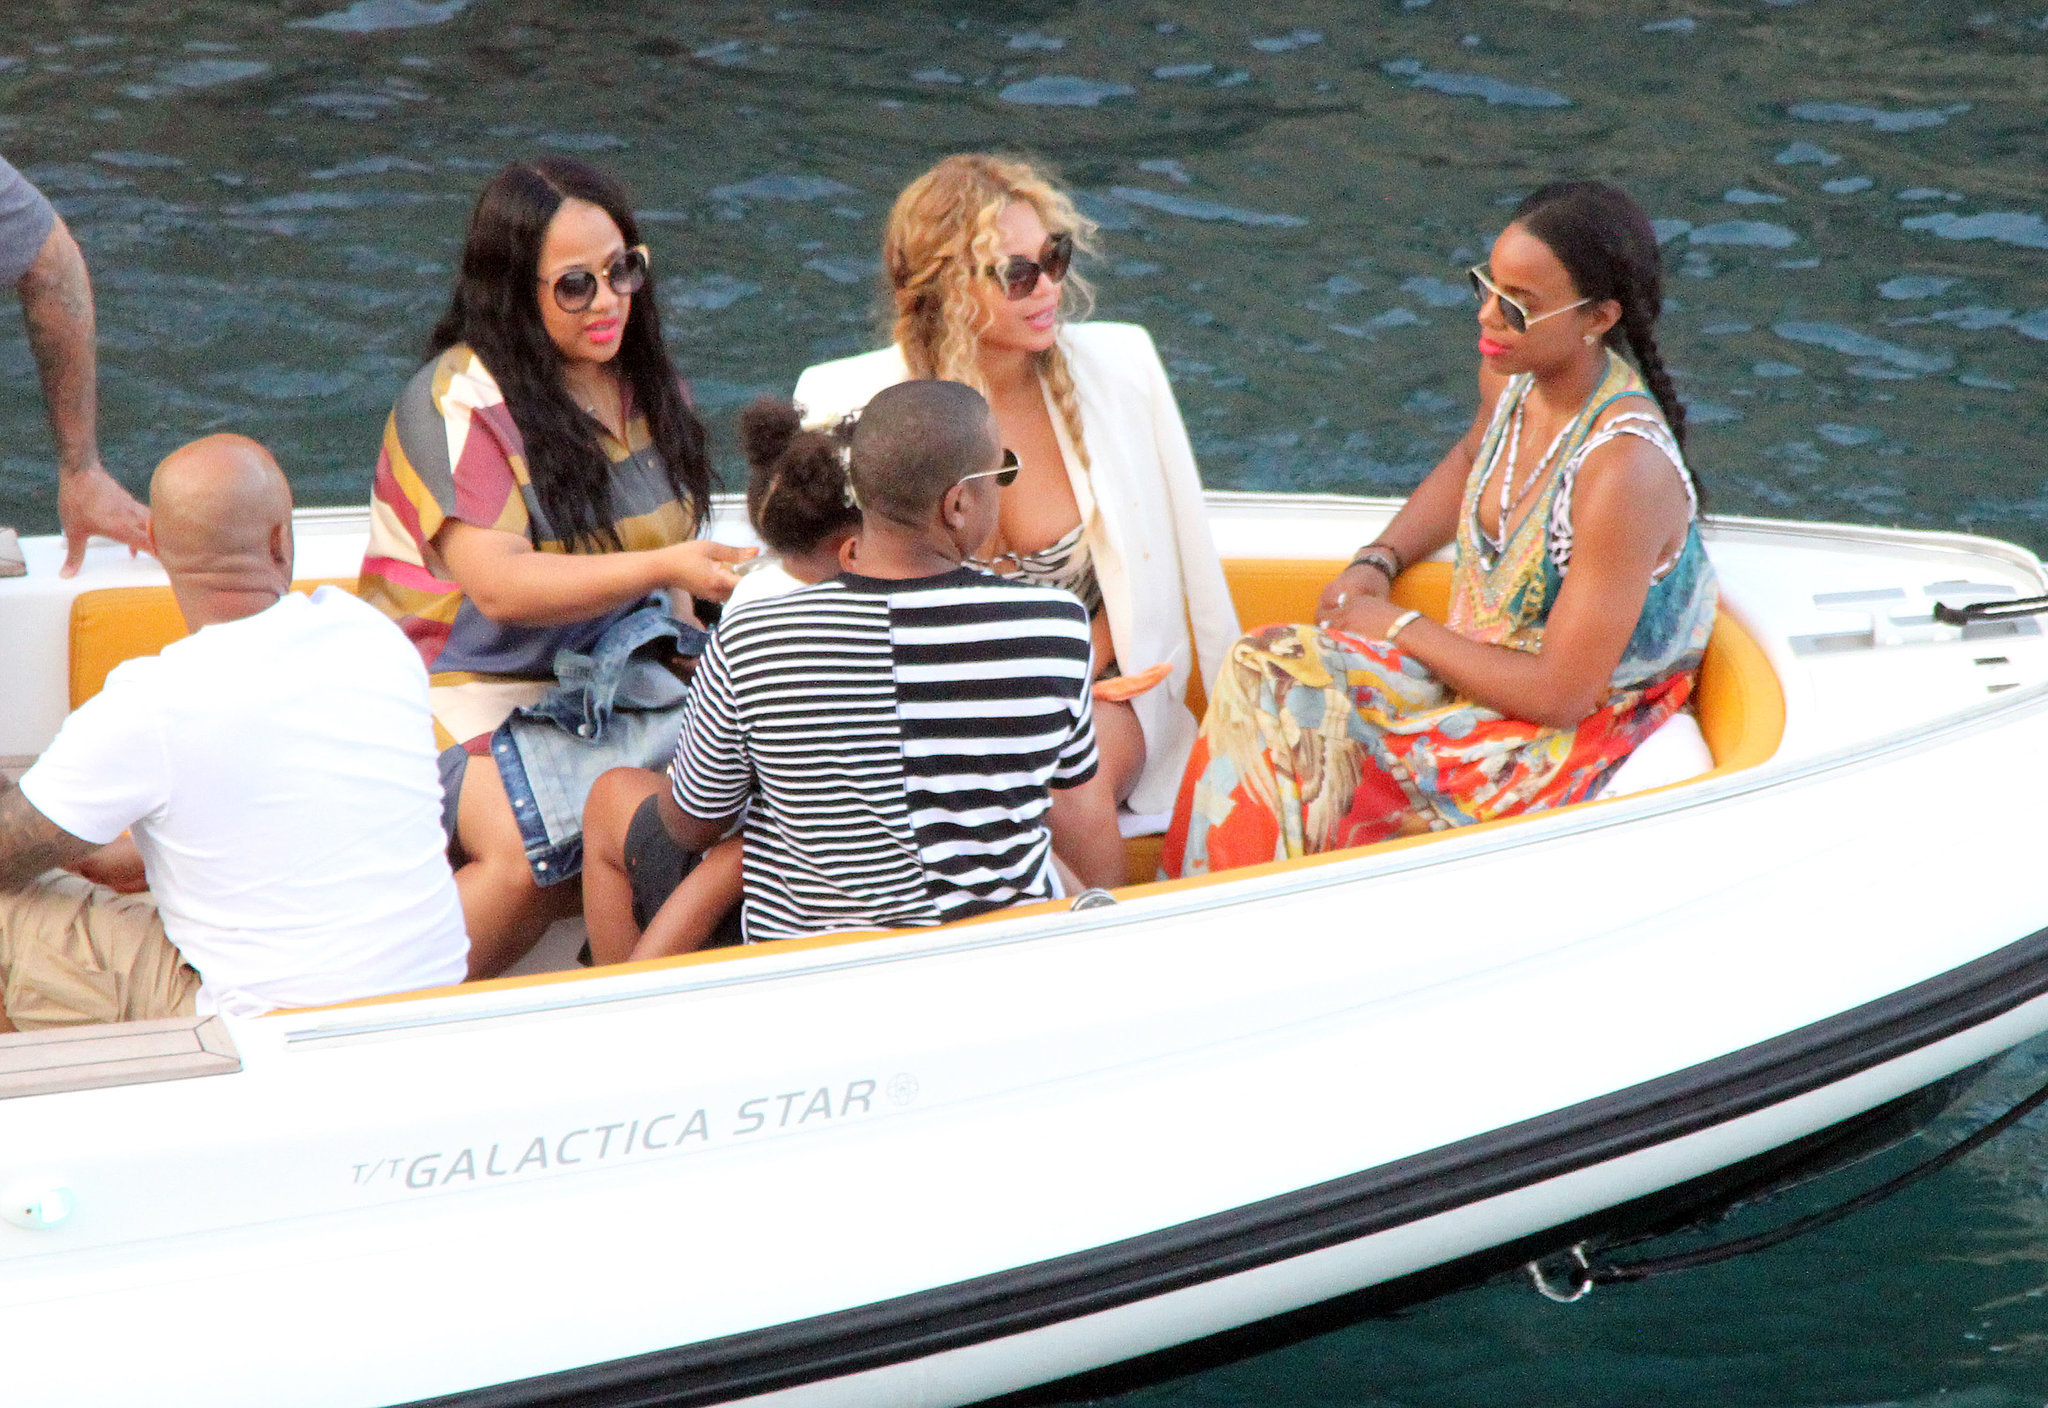 Beyonce-Jay-Z-Vacation-Italy-2015-Pictures (2)